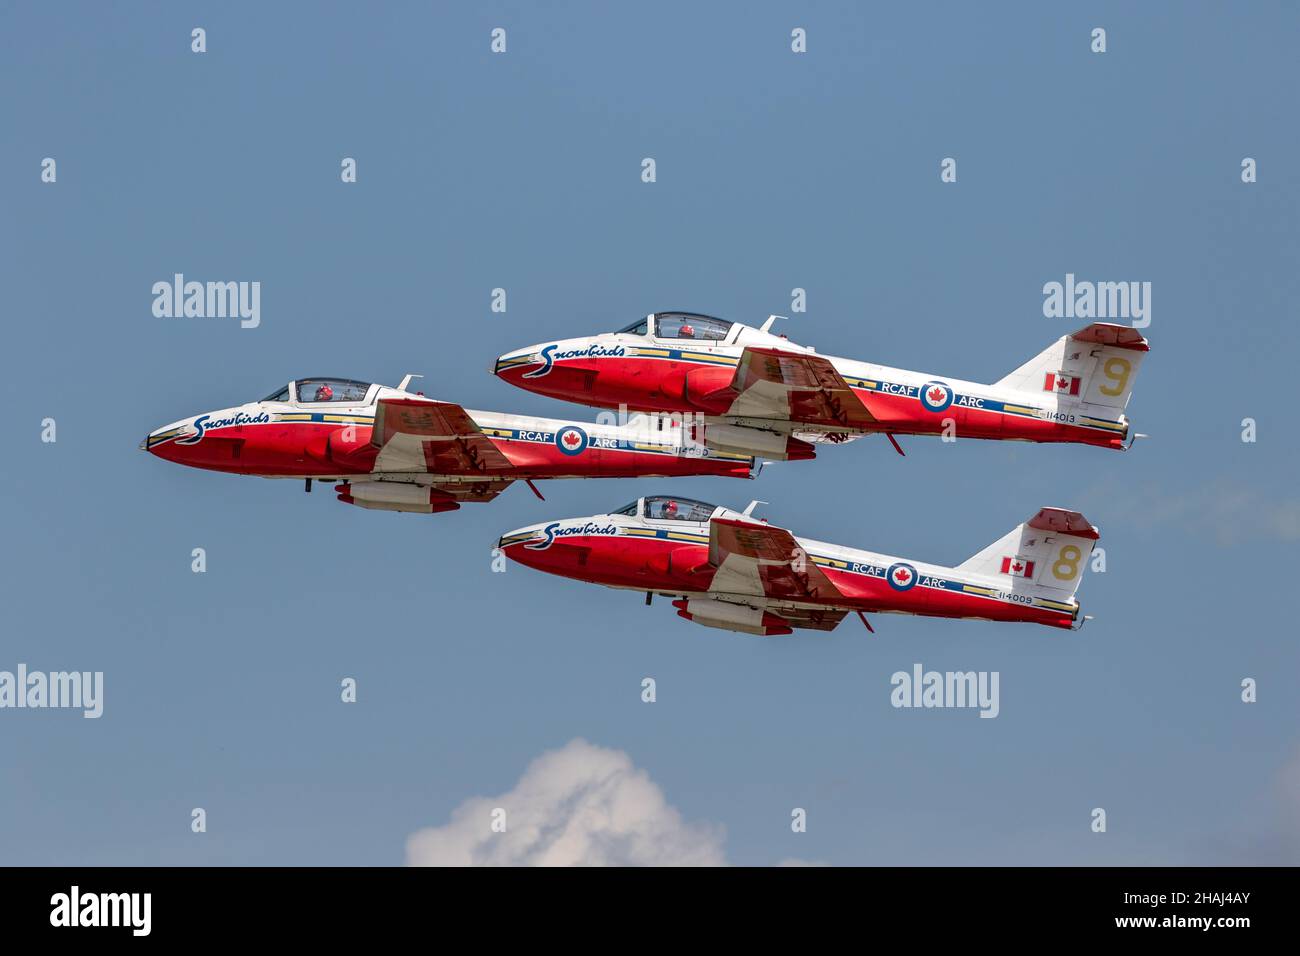 Il Royal Canadian Air Force's (RCAF) 431 Air Demonstration Squadron, The Snowbirds, si esibisce all'Airshow London SkyDrive di Londra, Ontario, Canada. Foto Stock